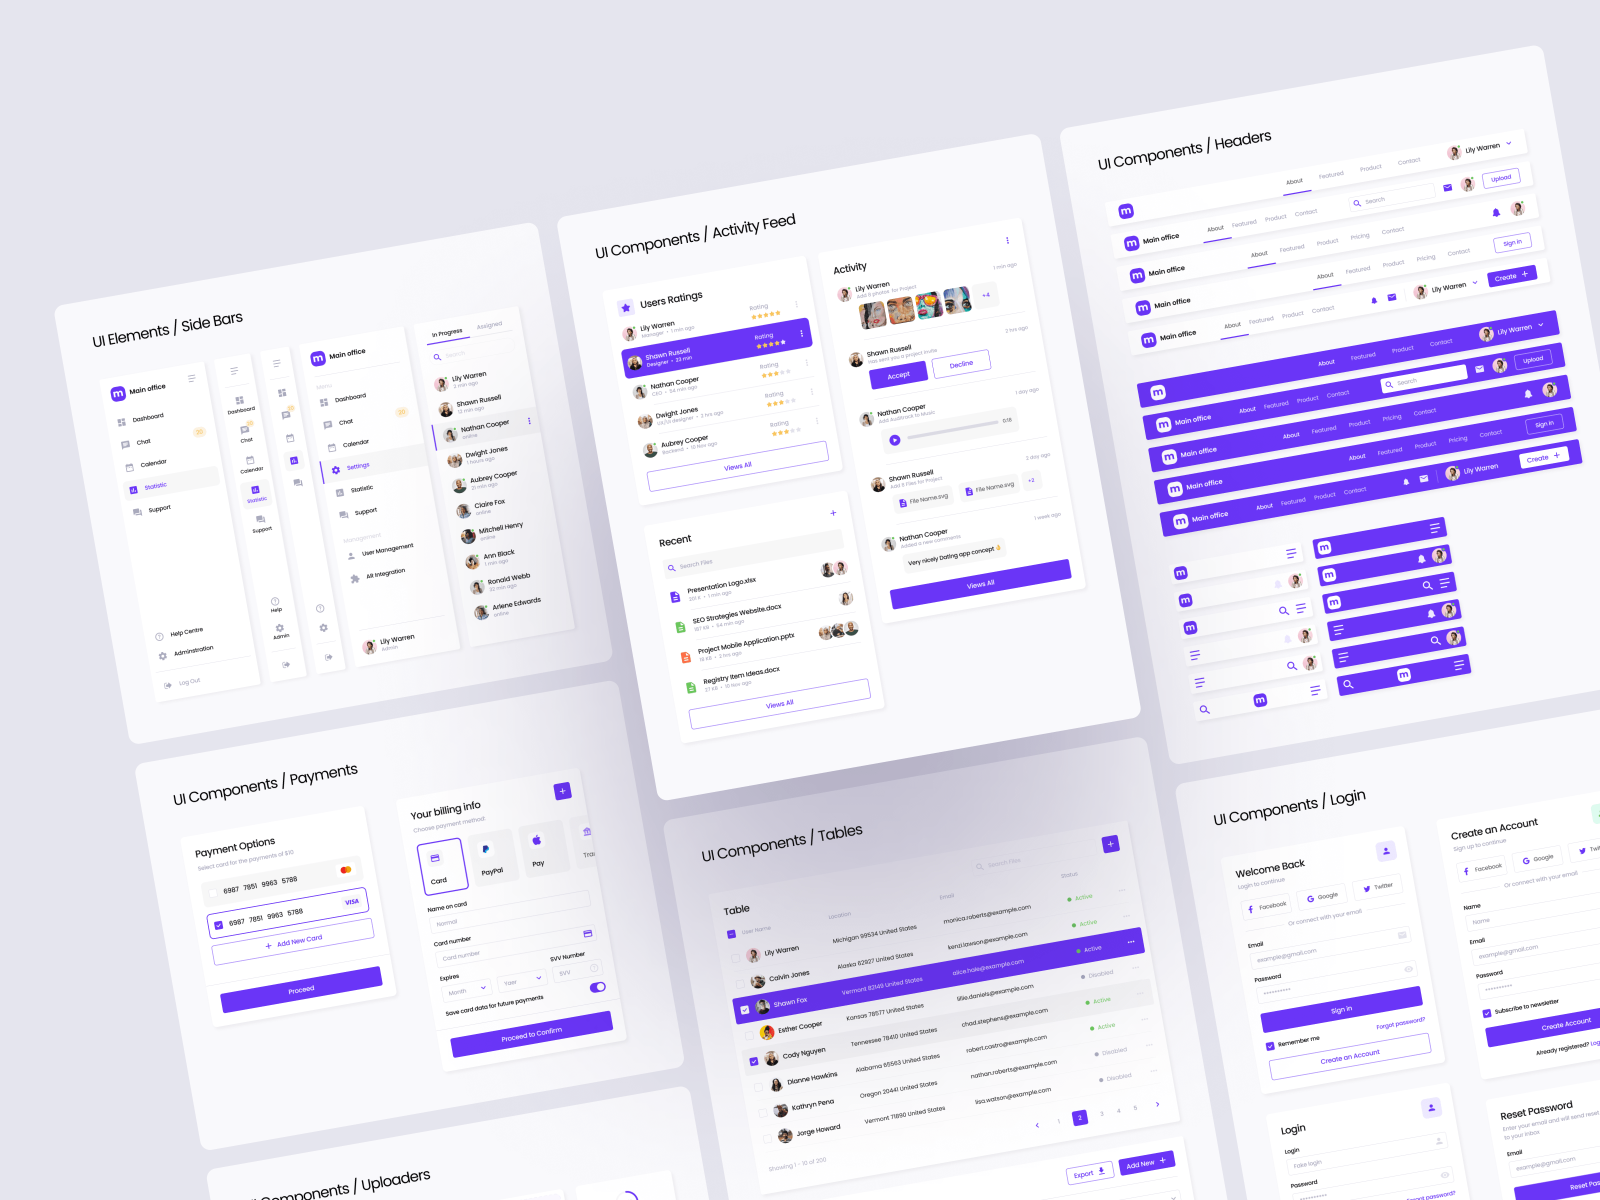 NEW: Boost UI Kit for designers 🔥 release product hunt component product uikit element icons styles templates colorful flat minimal icon typography ux ui design website craftwork web